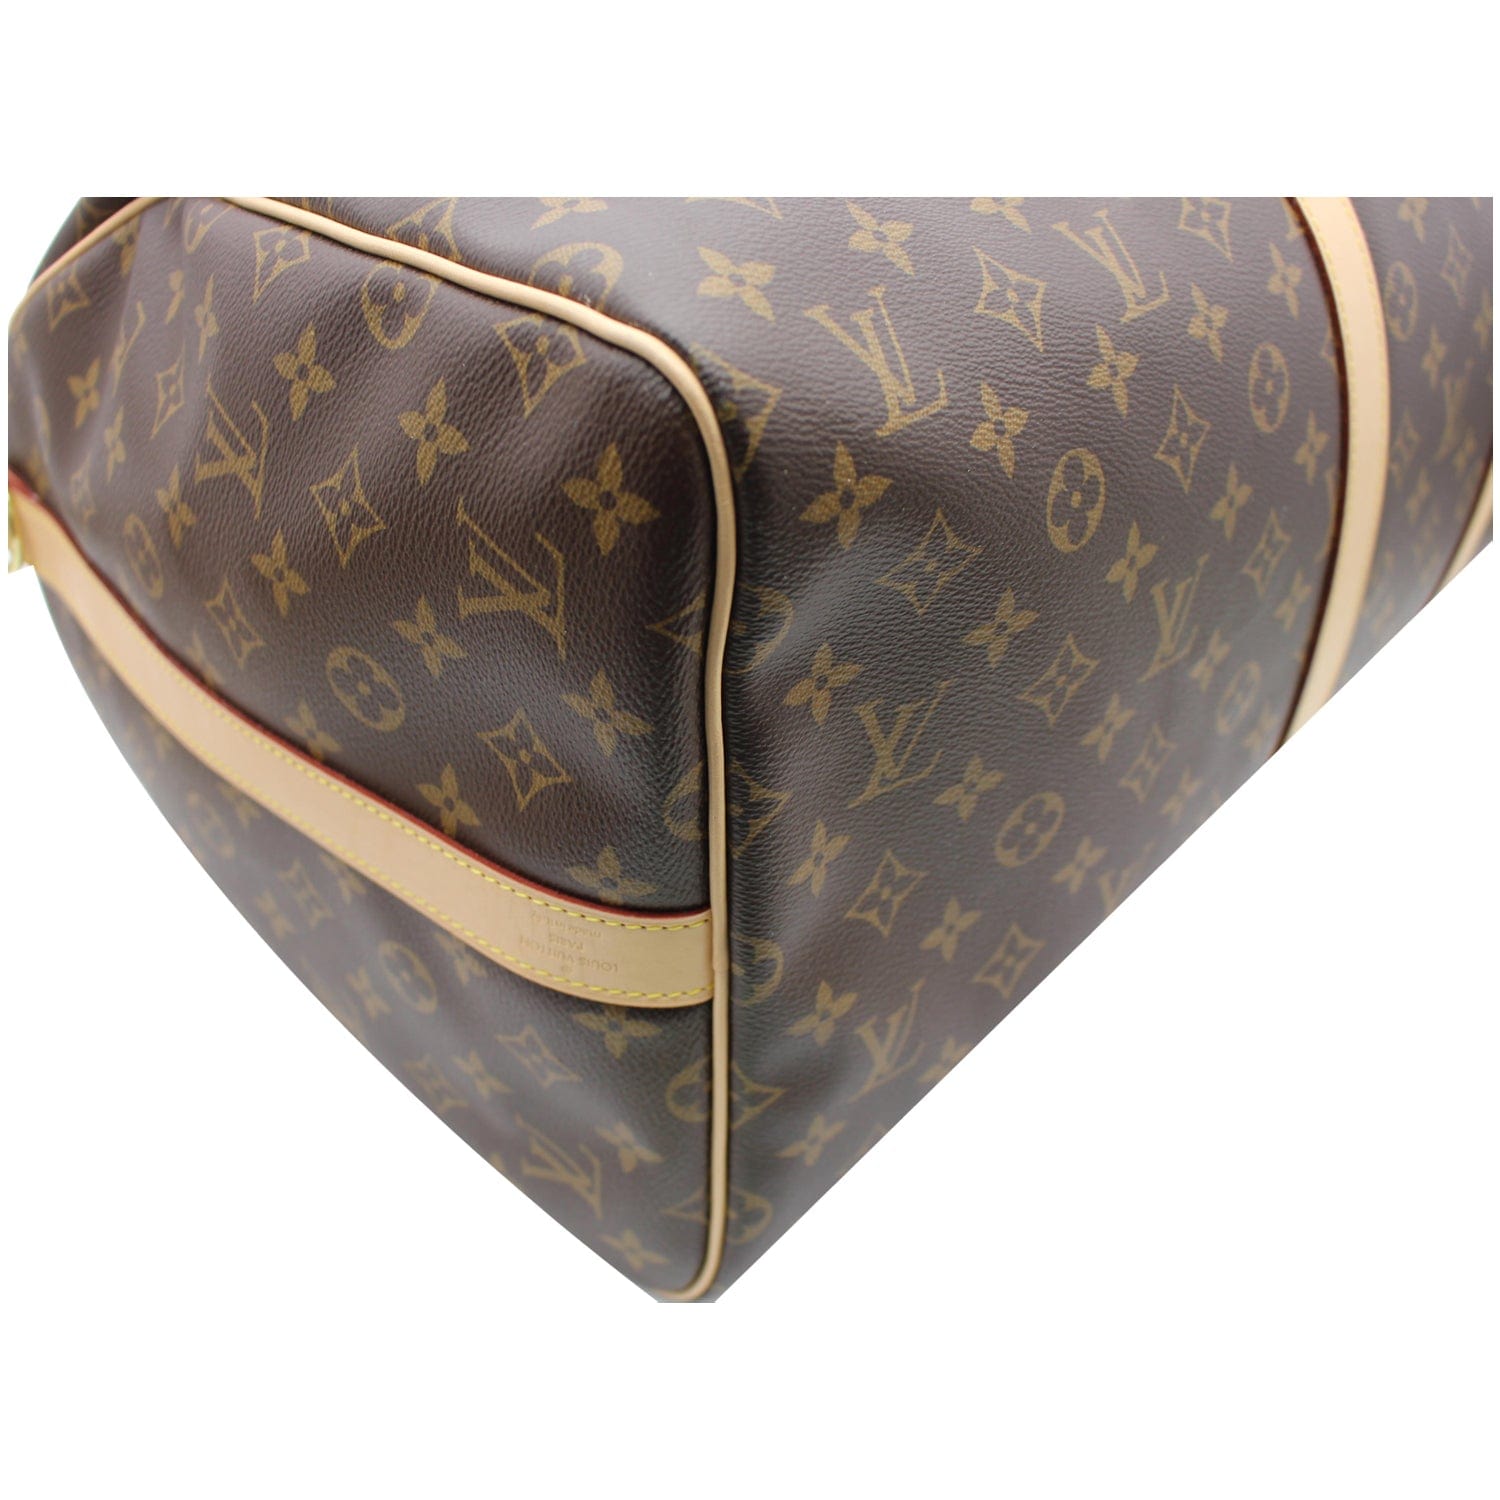 Louis Vuitton Monogram Keepall 55 Travel Bag ○ Labellov ○ Buy and Sell  Authentic Luxury